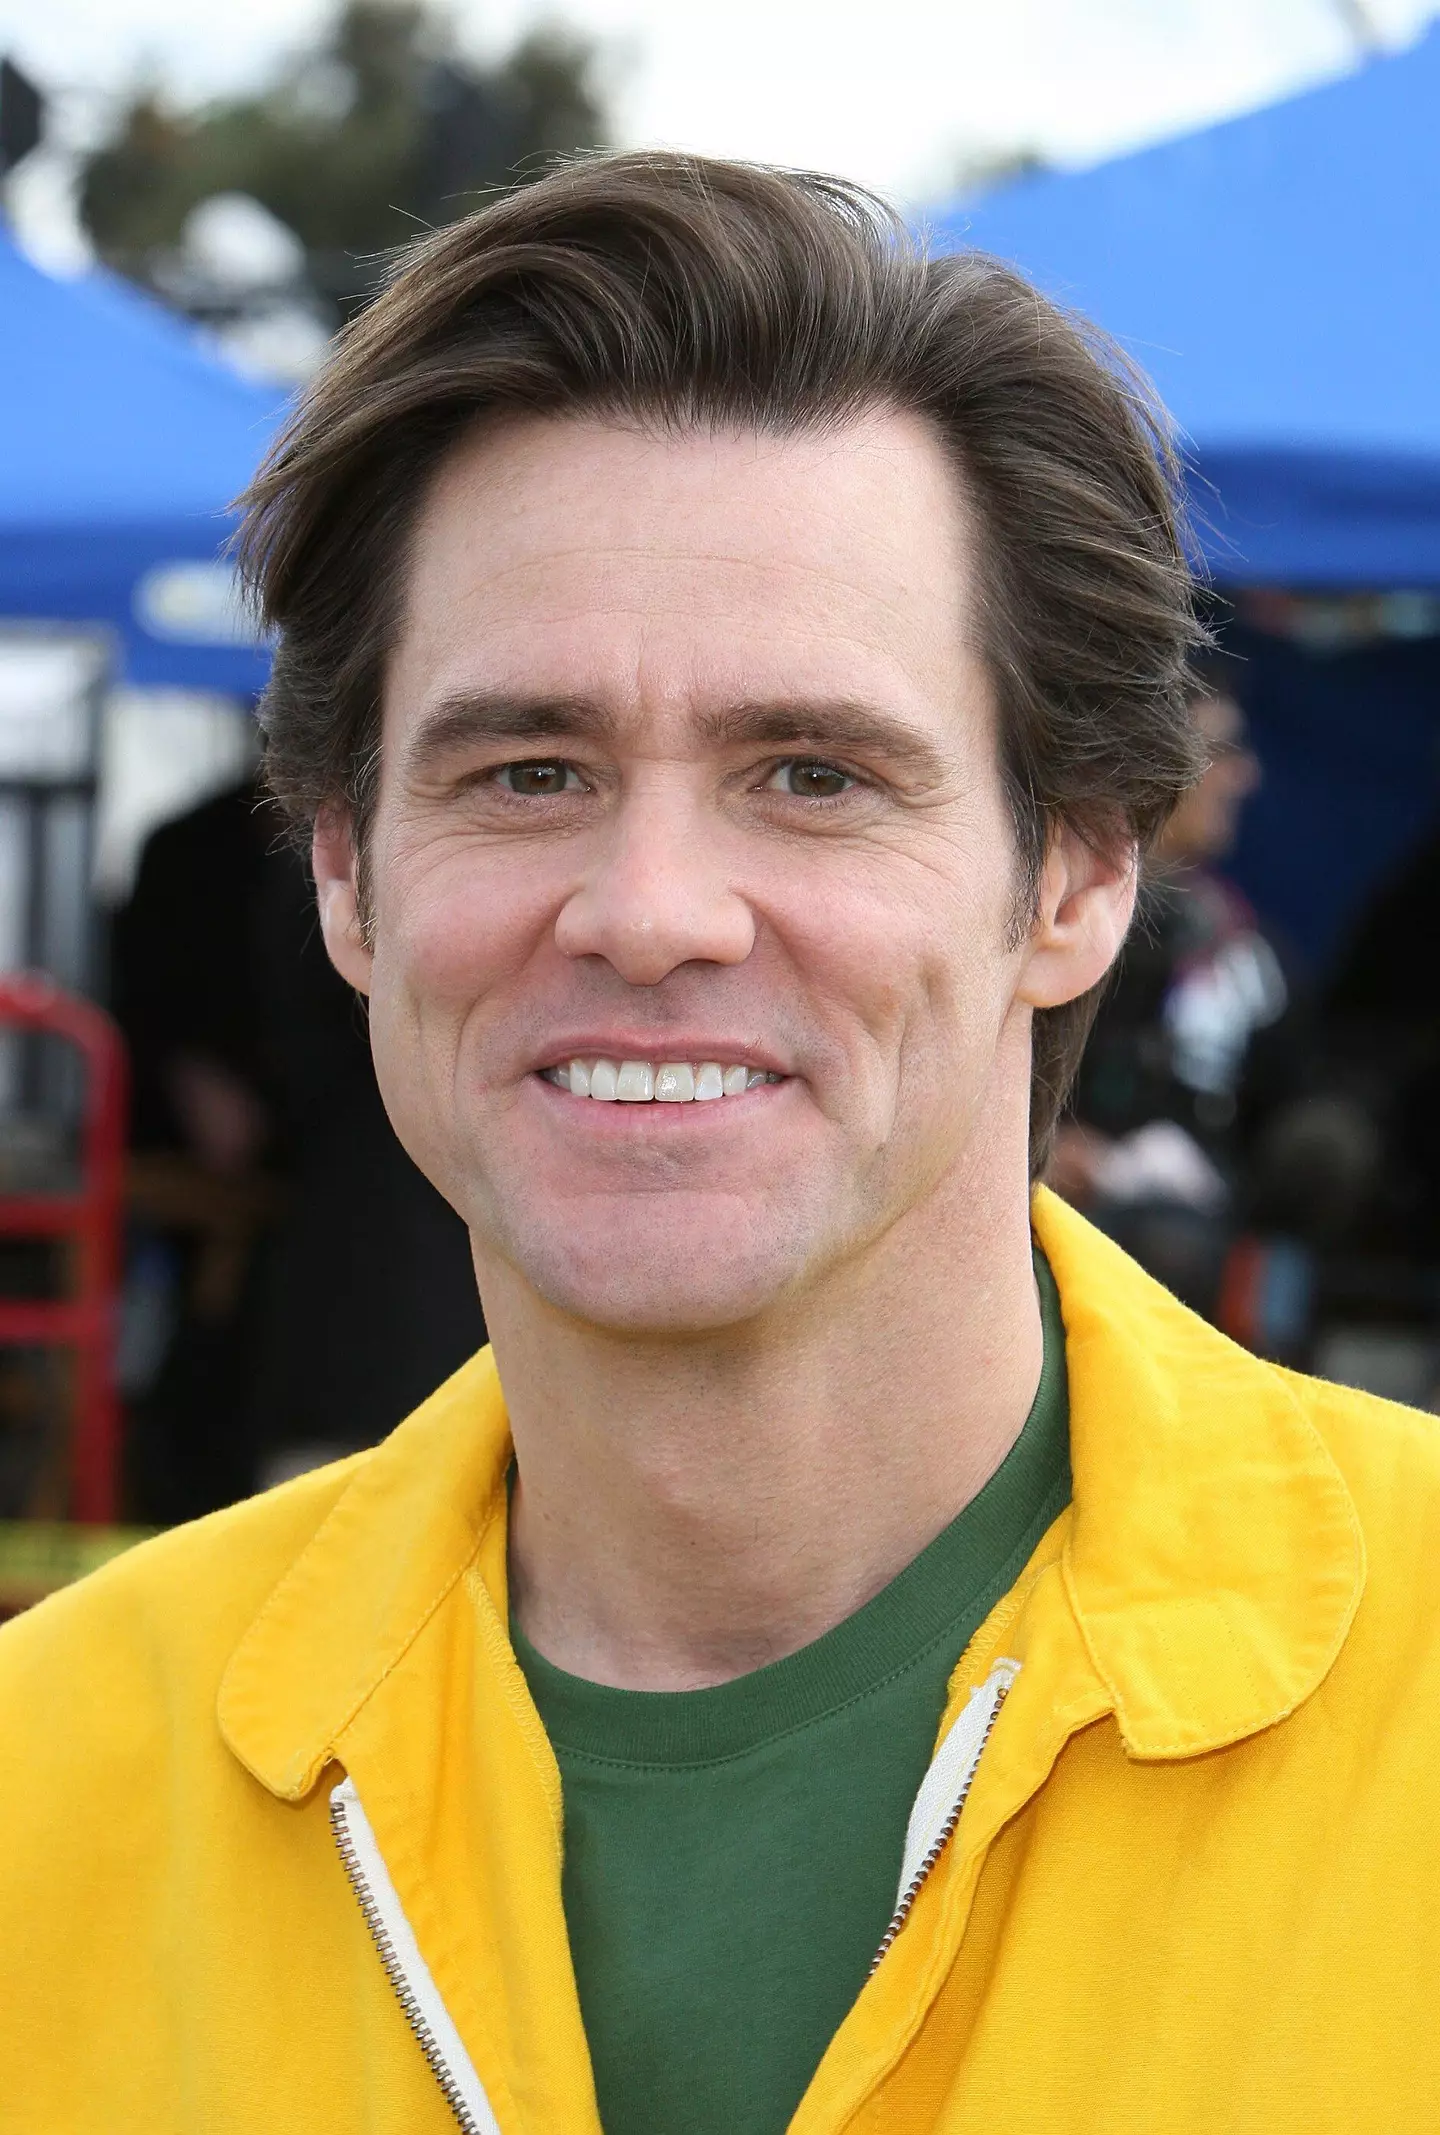 Heather Shaw has gone viral for her resemblance to Jim Carrey.